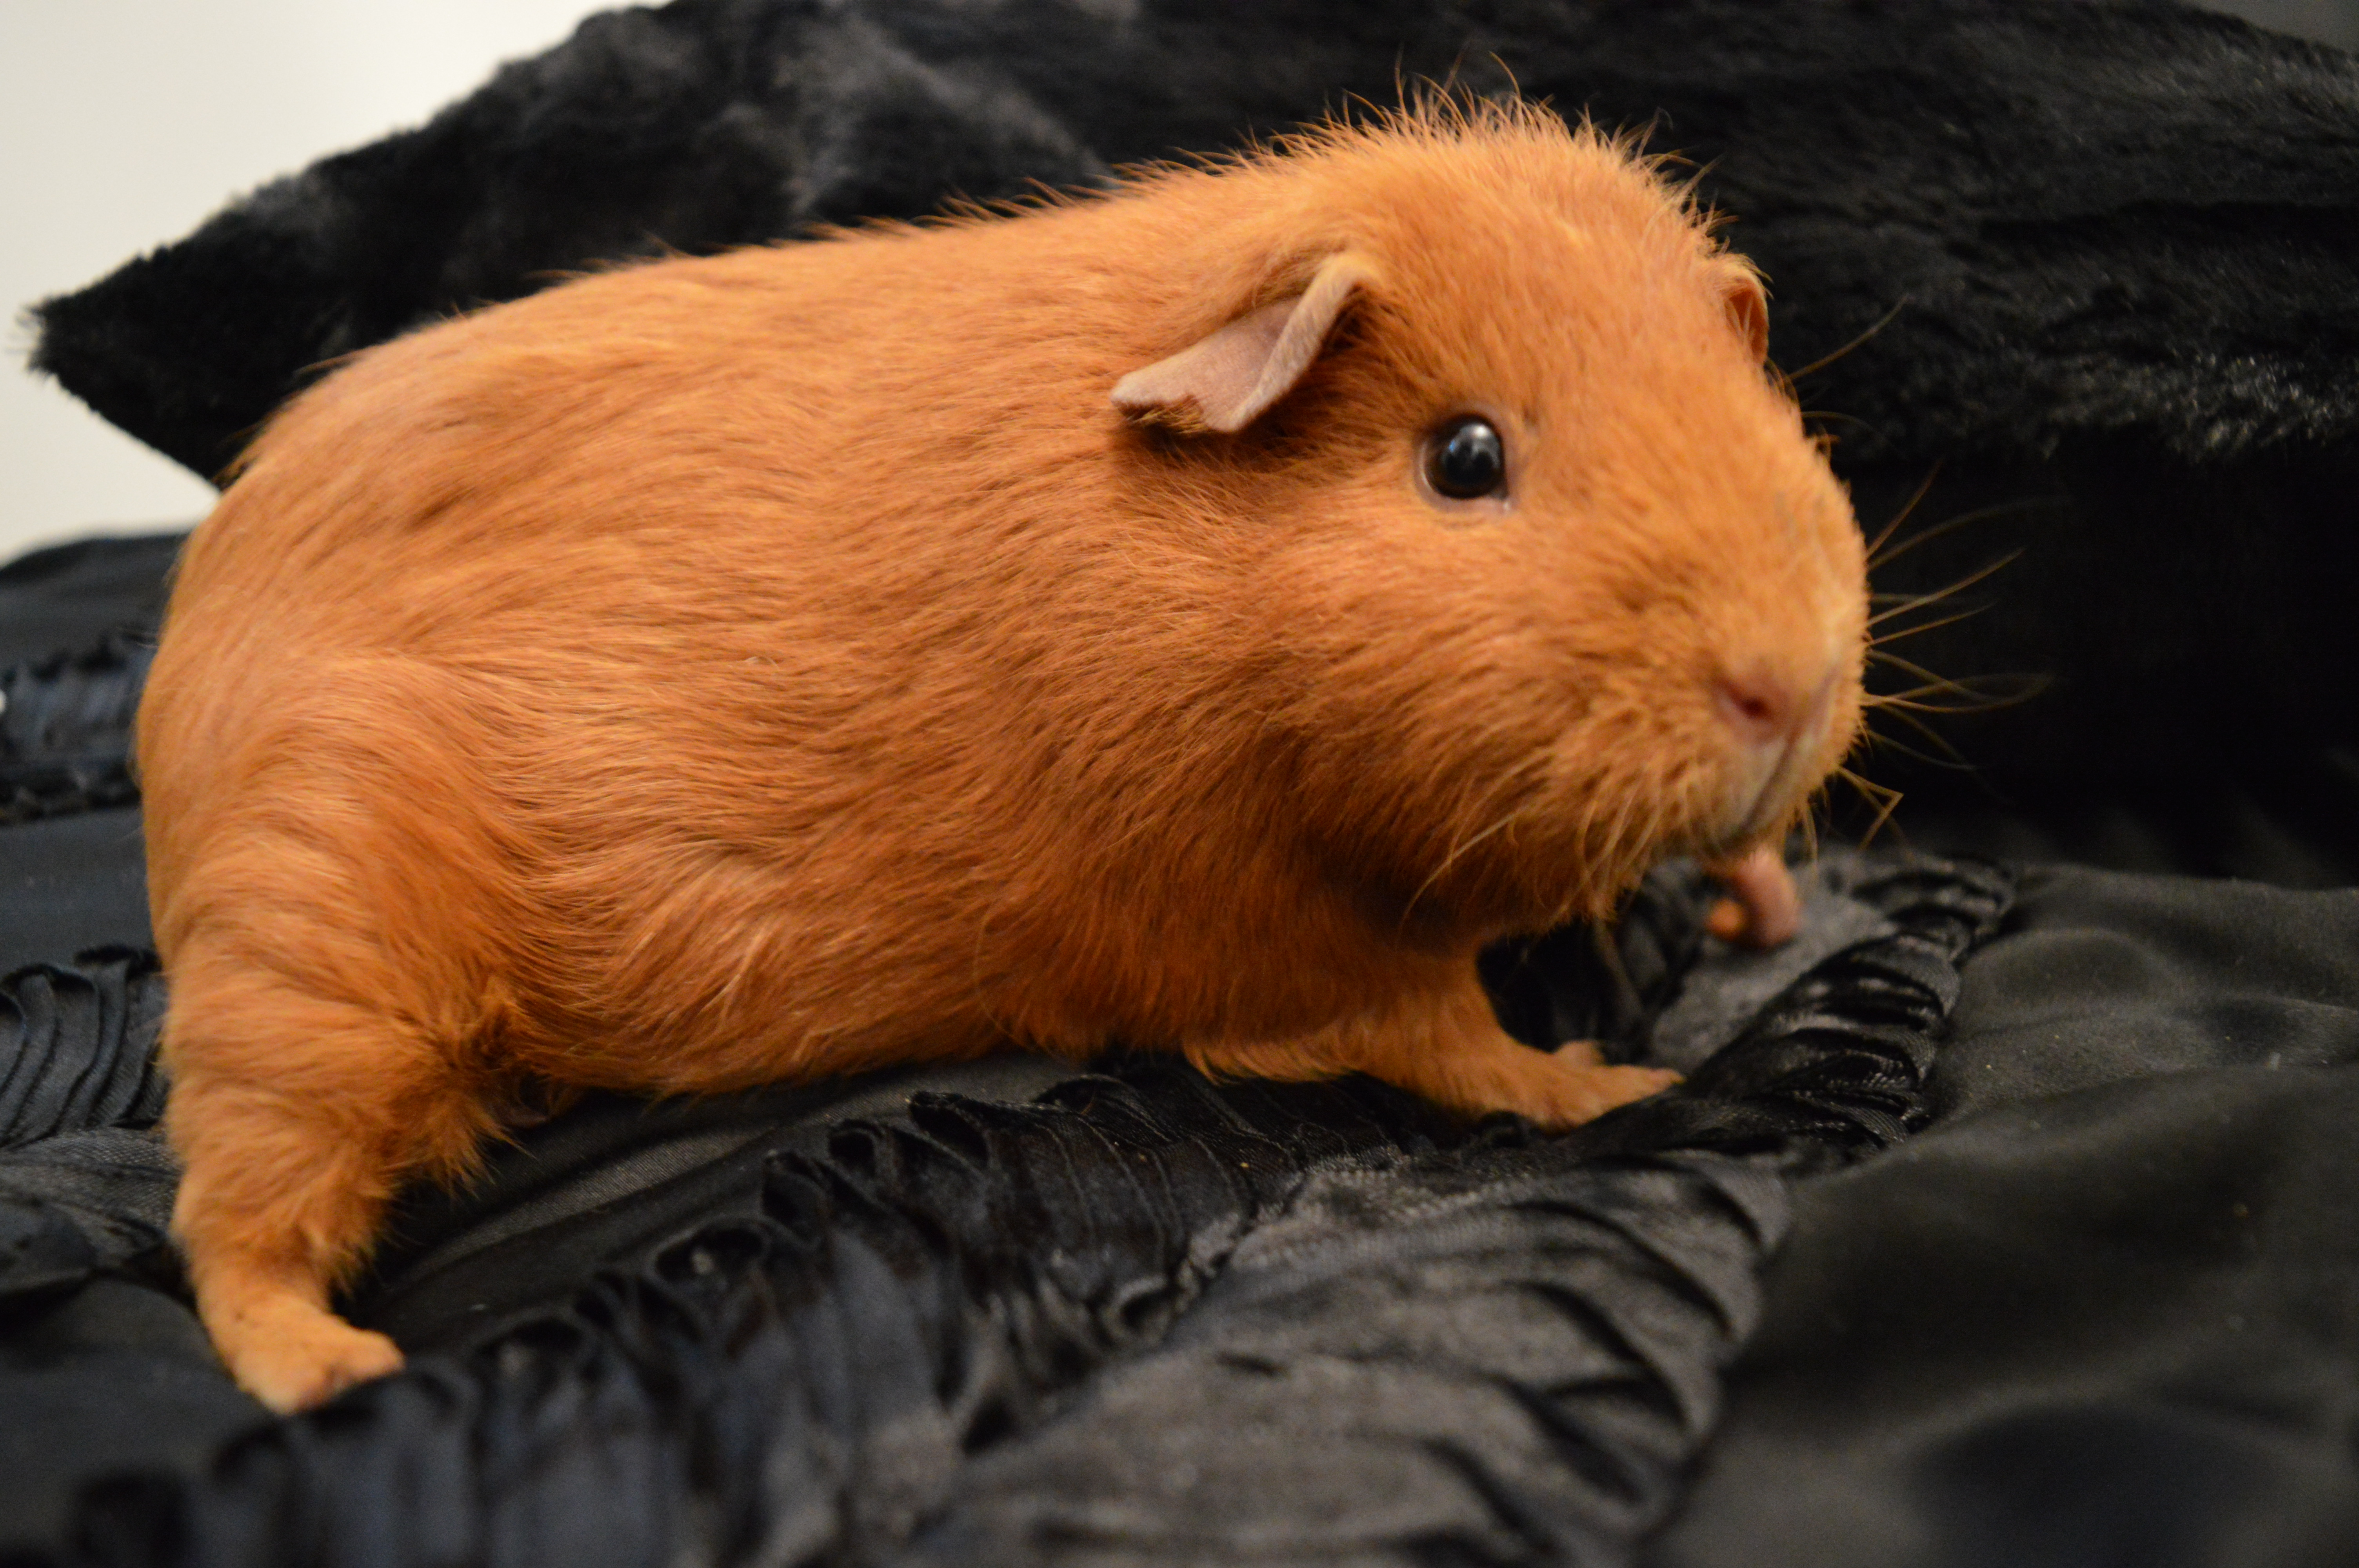 The Lakeland variation/breed of Cavy (Guinea Pig) that is a fully furred sk...